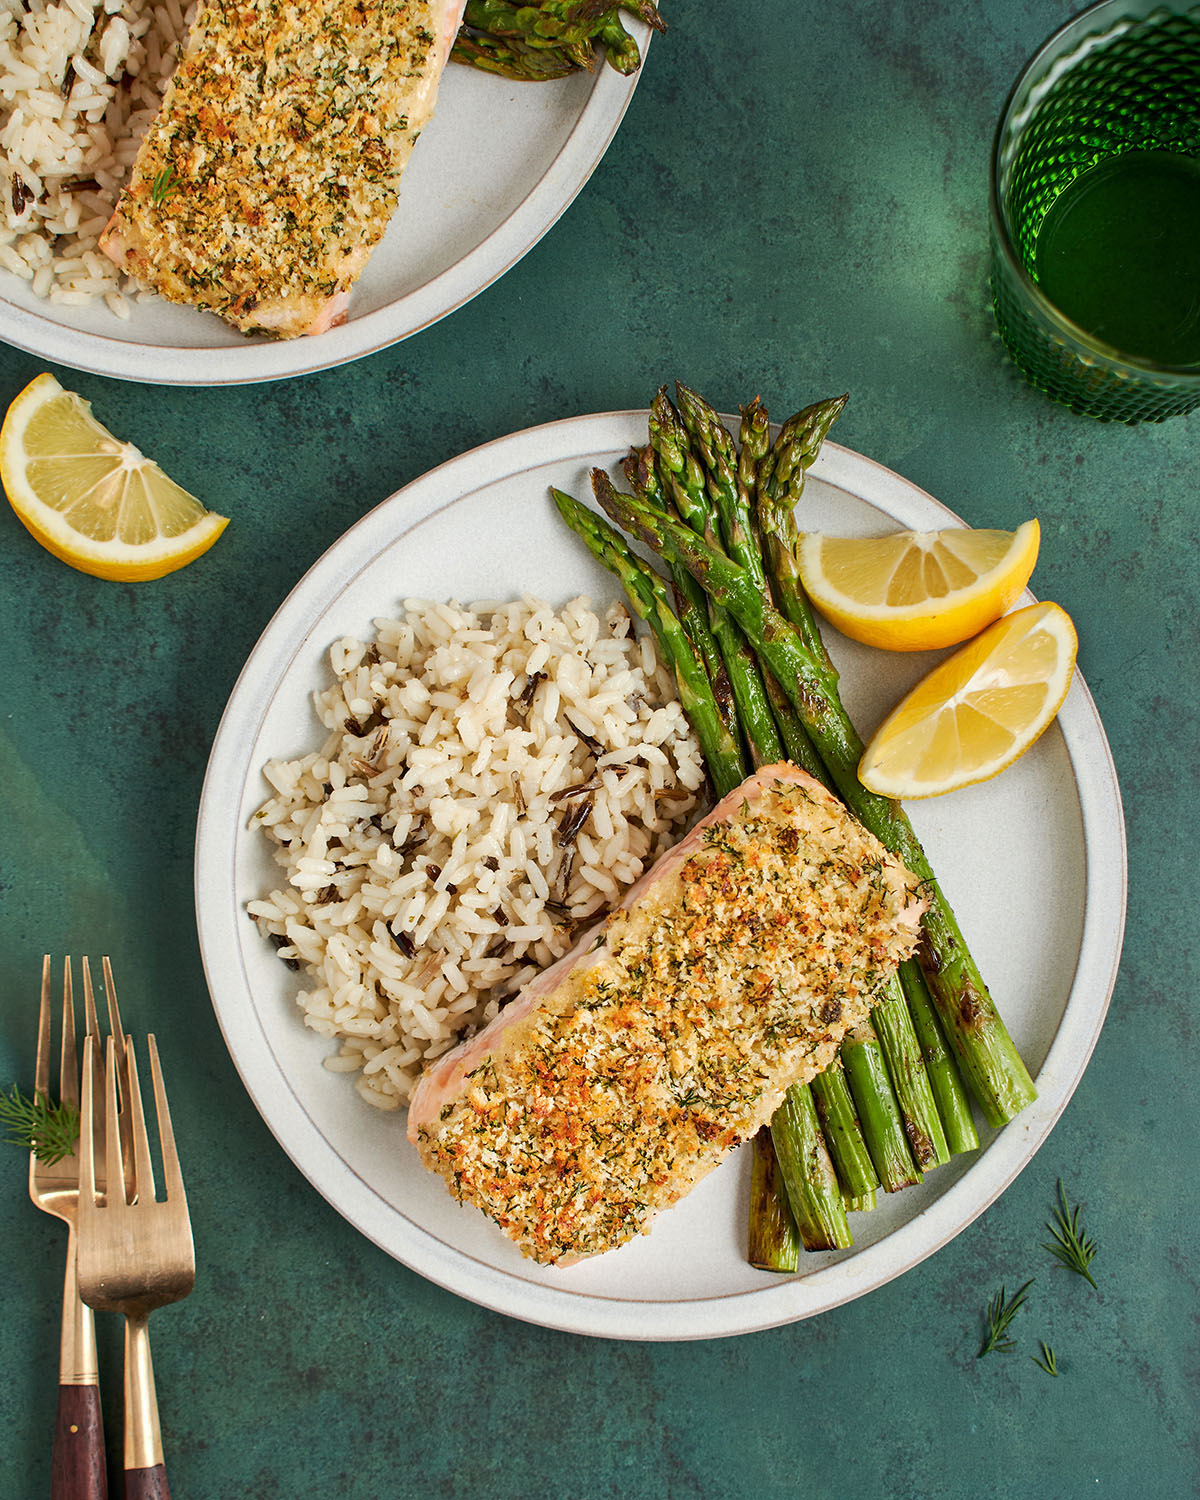 baked salmon on dinner plate with rice, asparagus, and lemon wedges